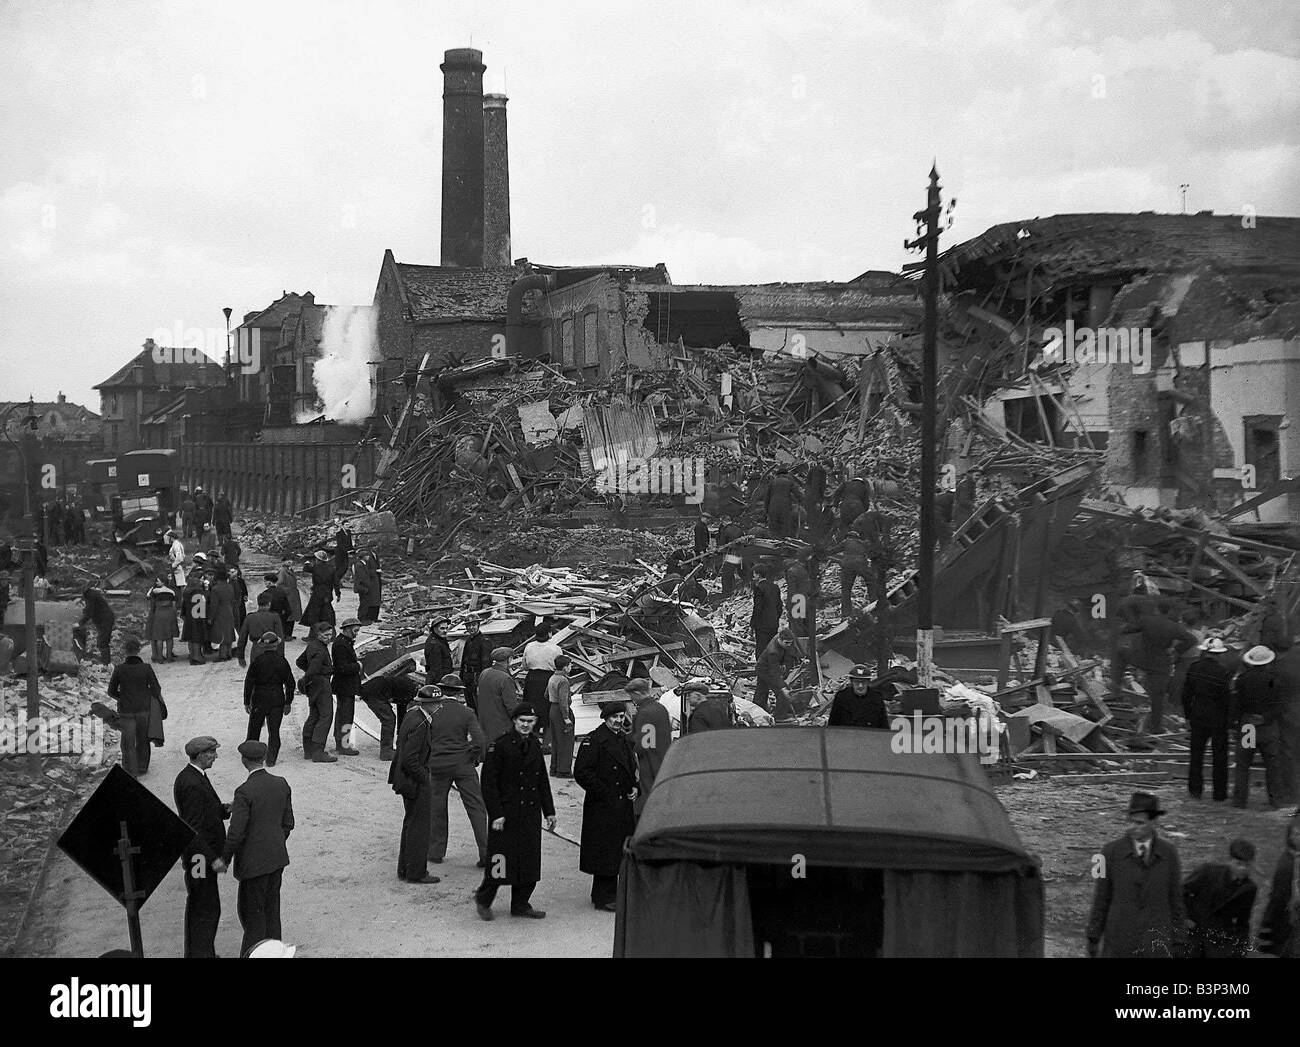 WW2 Air Raids Ilford Essex East London WW2 Bomb damage in Ilford East London after an air raid is looked over by emergency service as they look for survivors amongst the rubble of collapsed buildings homes and factorys Stock Photo